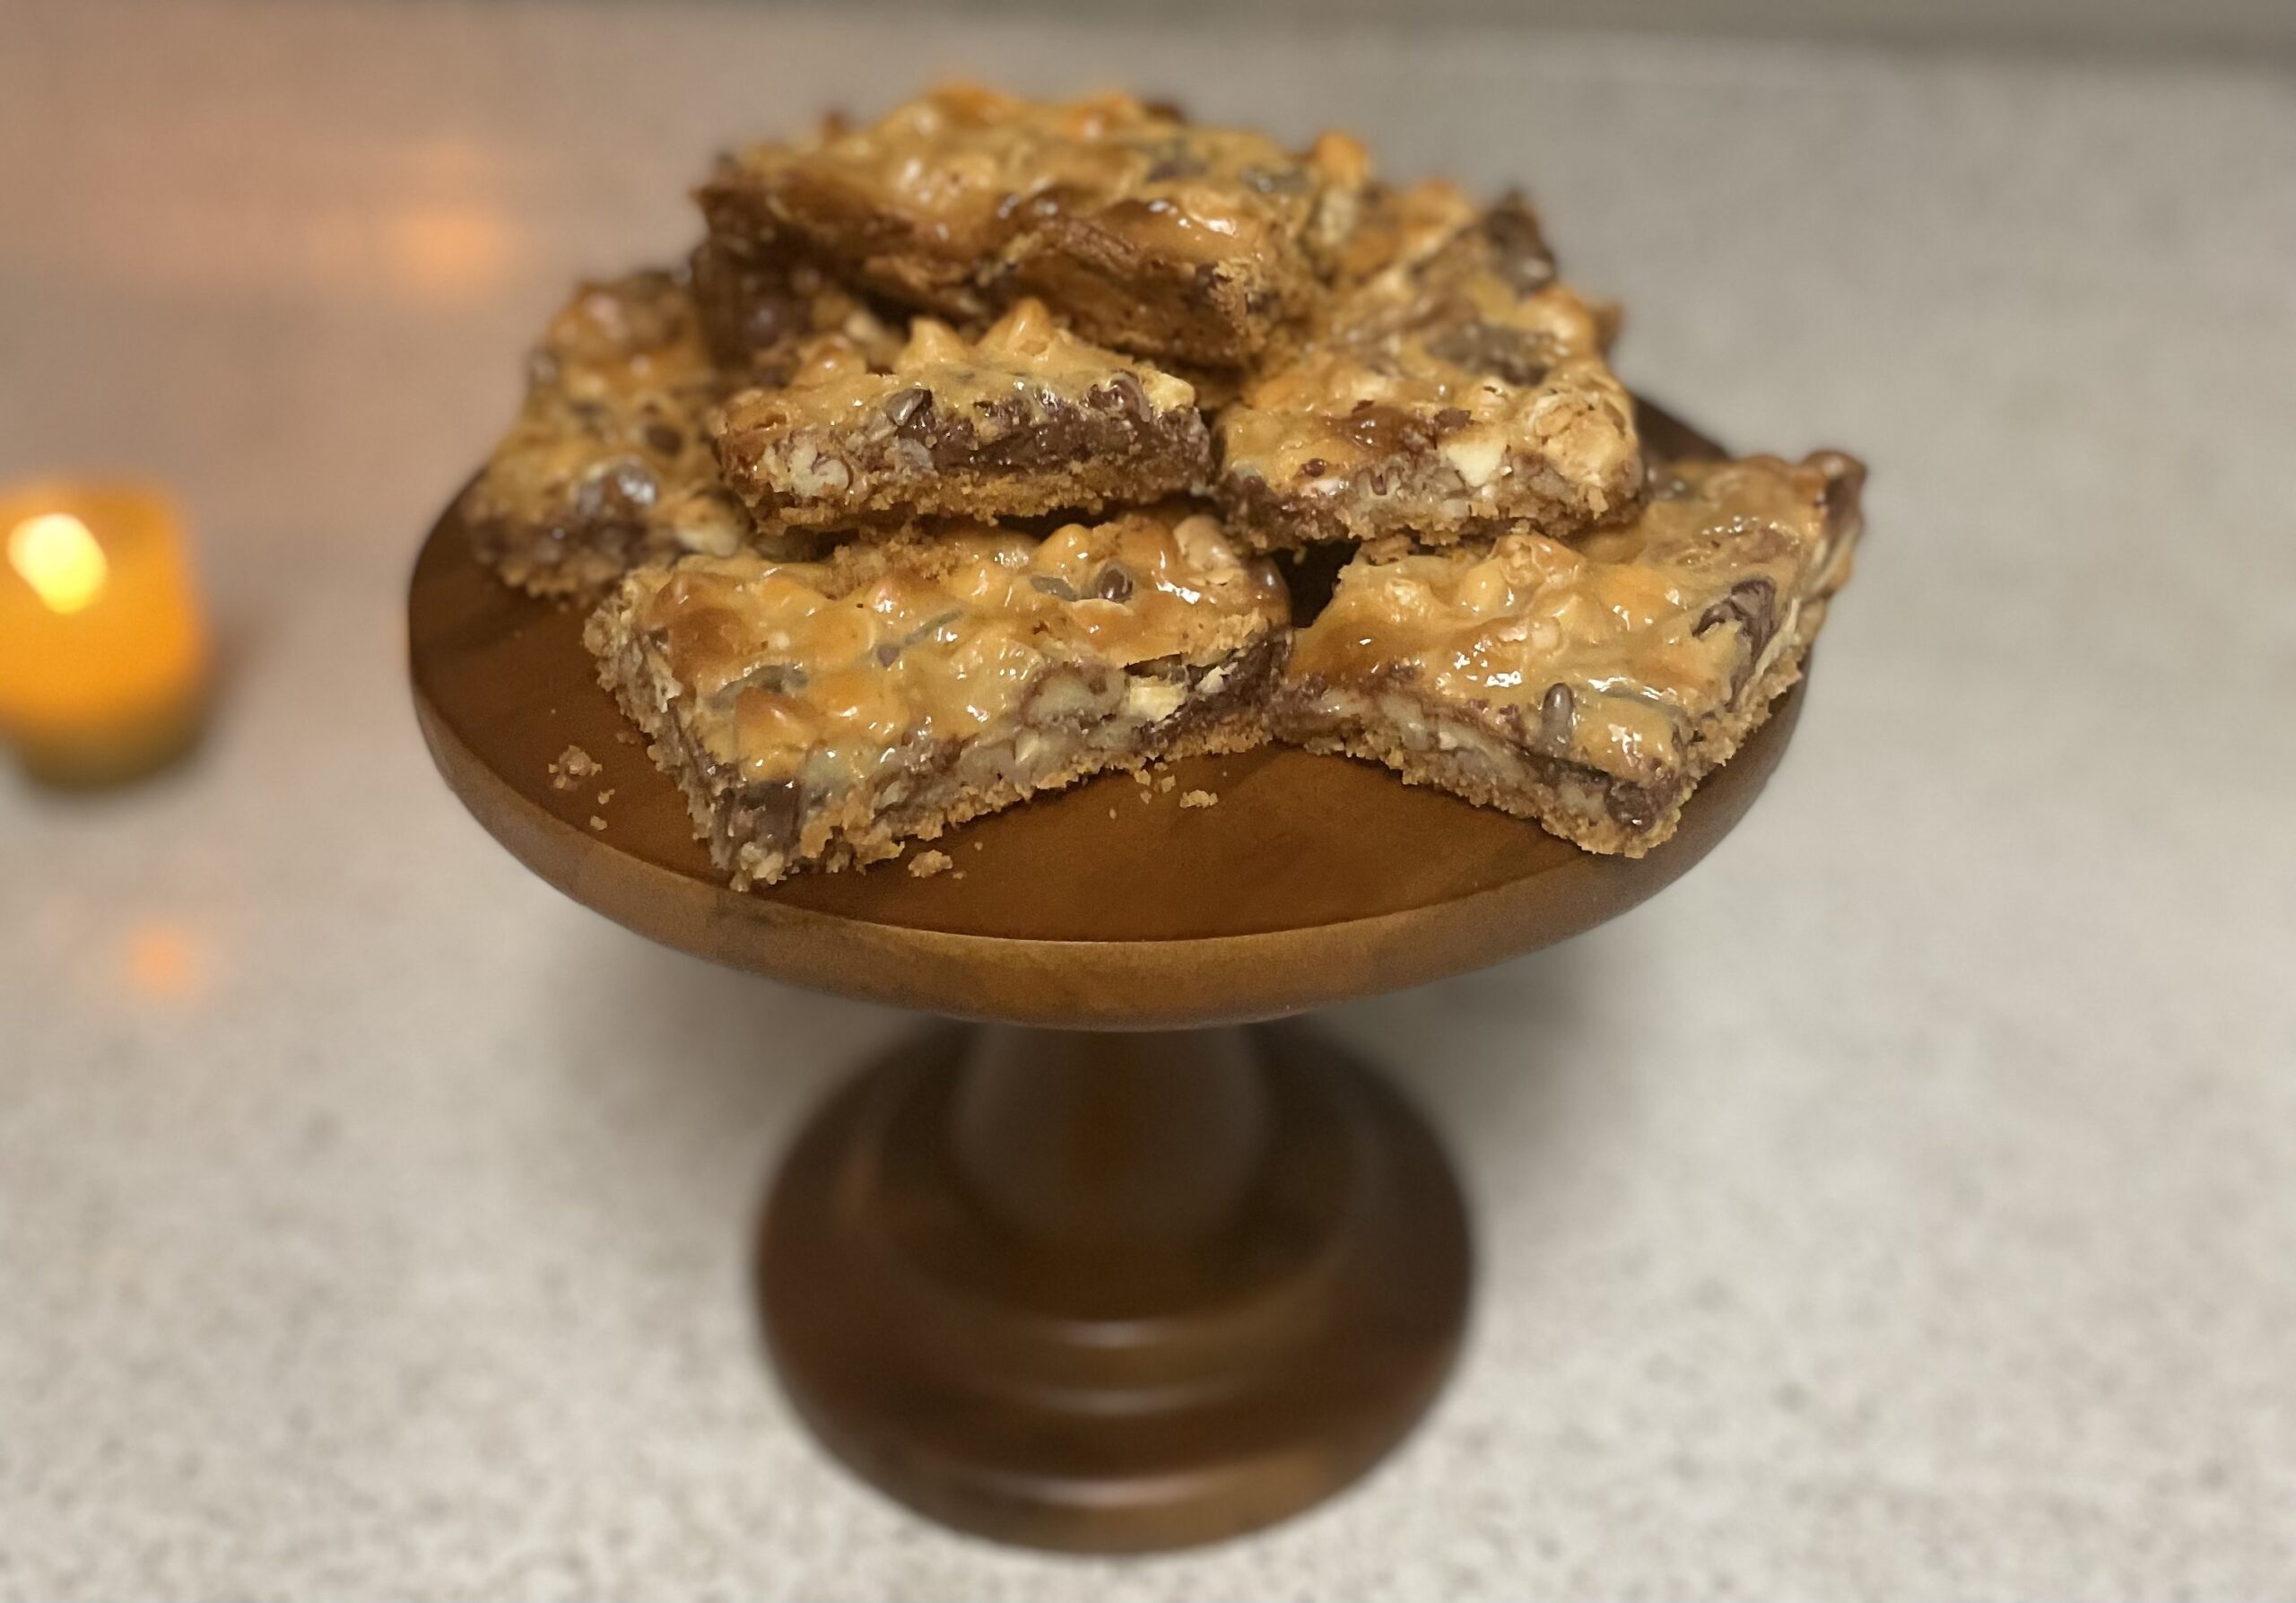 Seven Layer Bars all finished baking and plated up